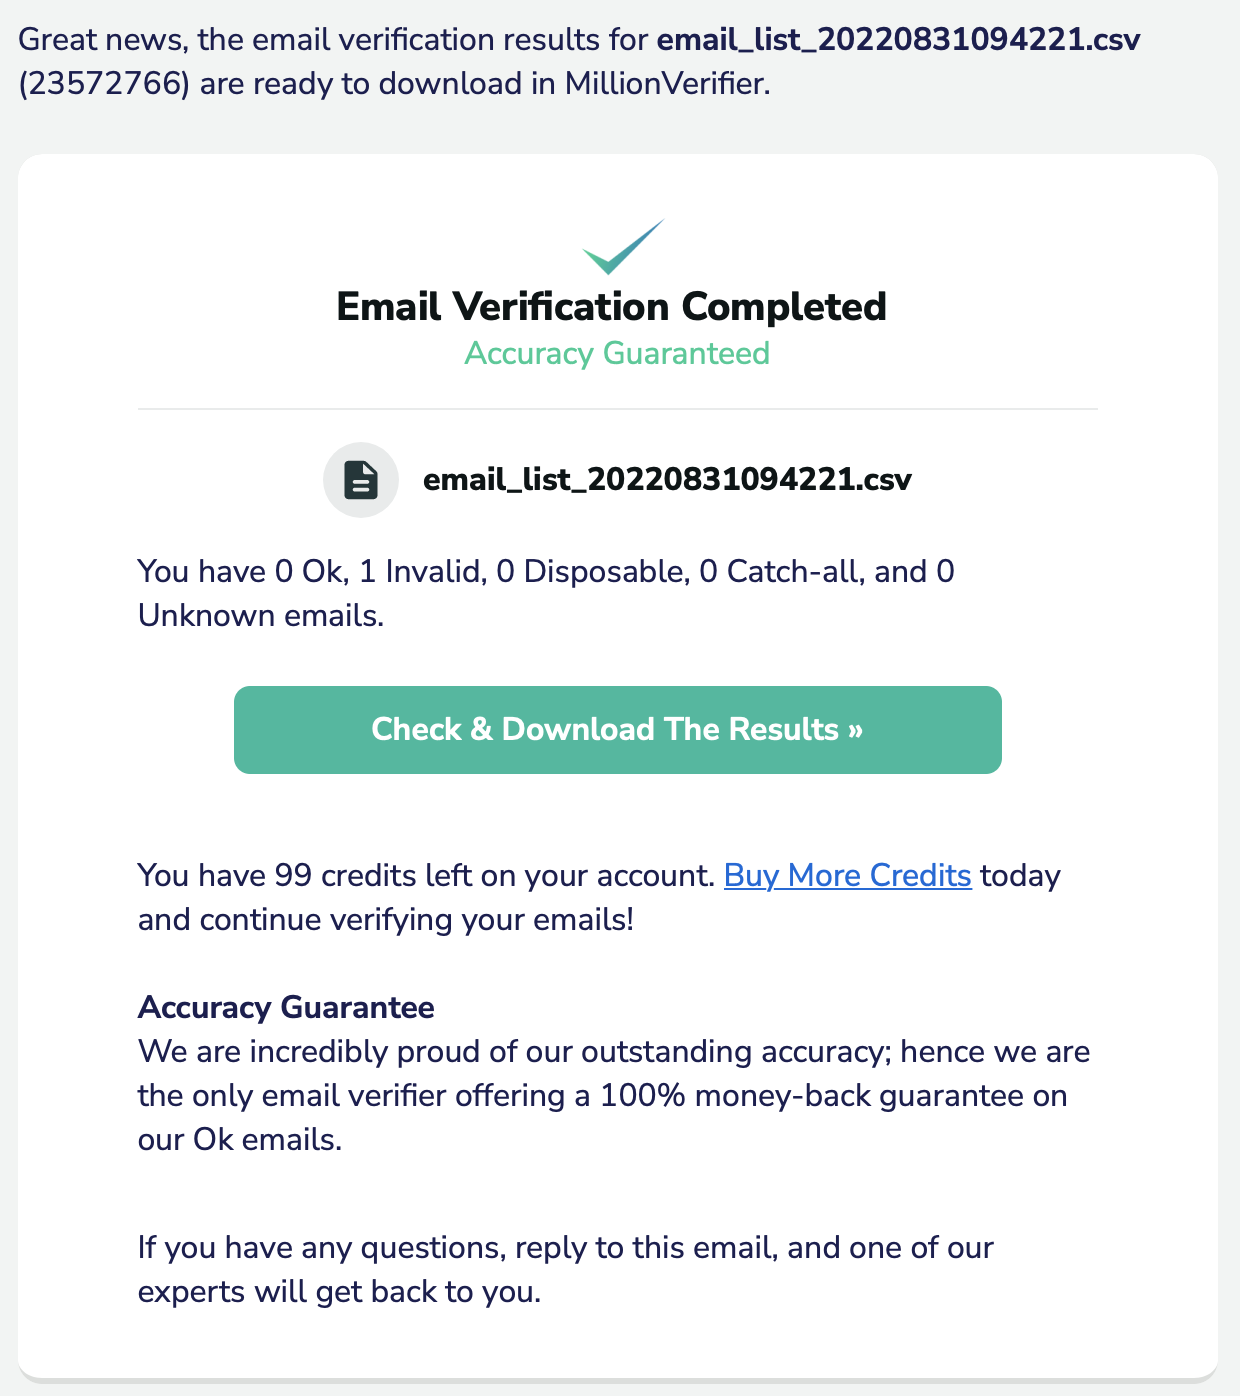 File Ready notification email from MillionVerifier